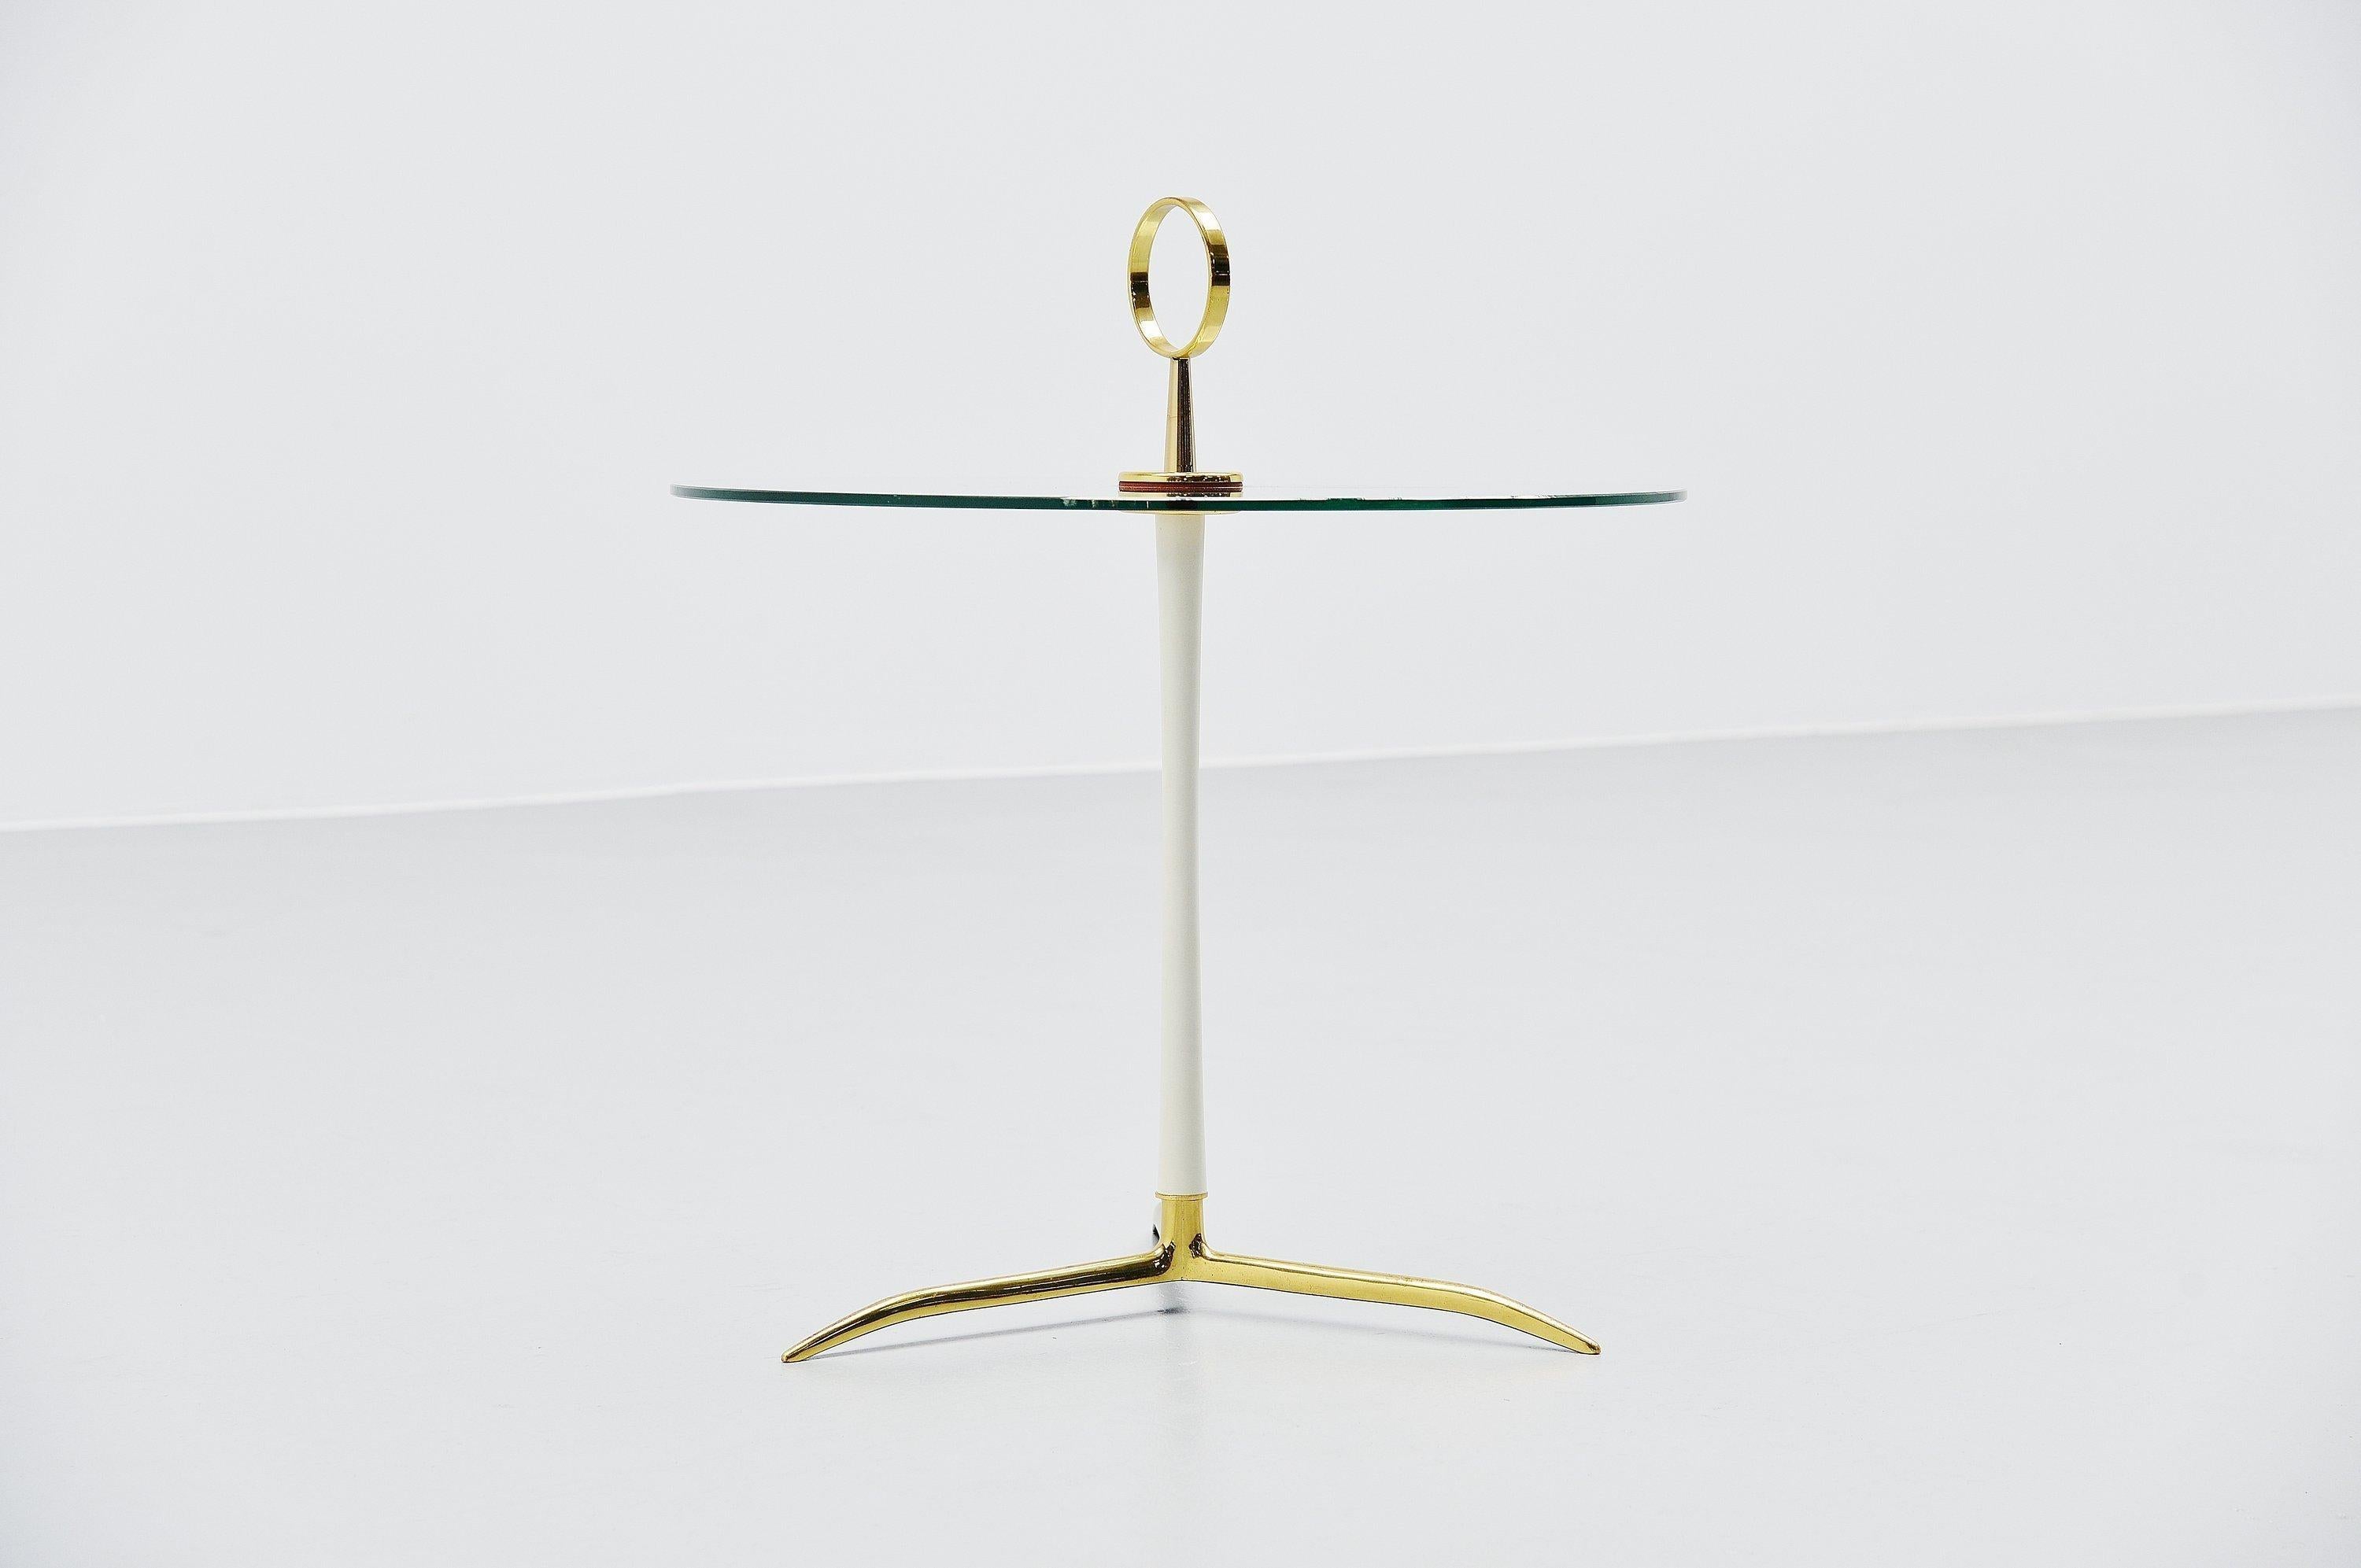 Sophisticated side table designed and manufactured by Cesare Lacca, Italy 1950. This table has a solid brass tripod base and white bar. It has a round brass handle to easily grab it and move it while vacuum cleaning for example, or use it elsewhere.